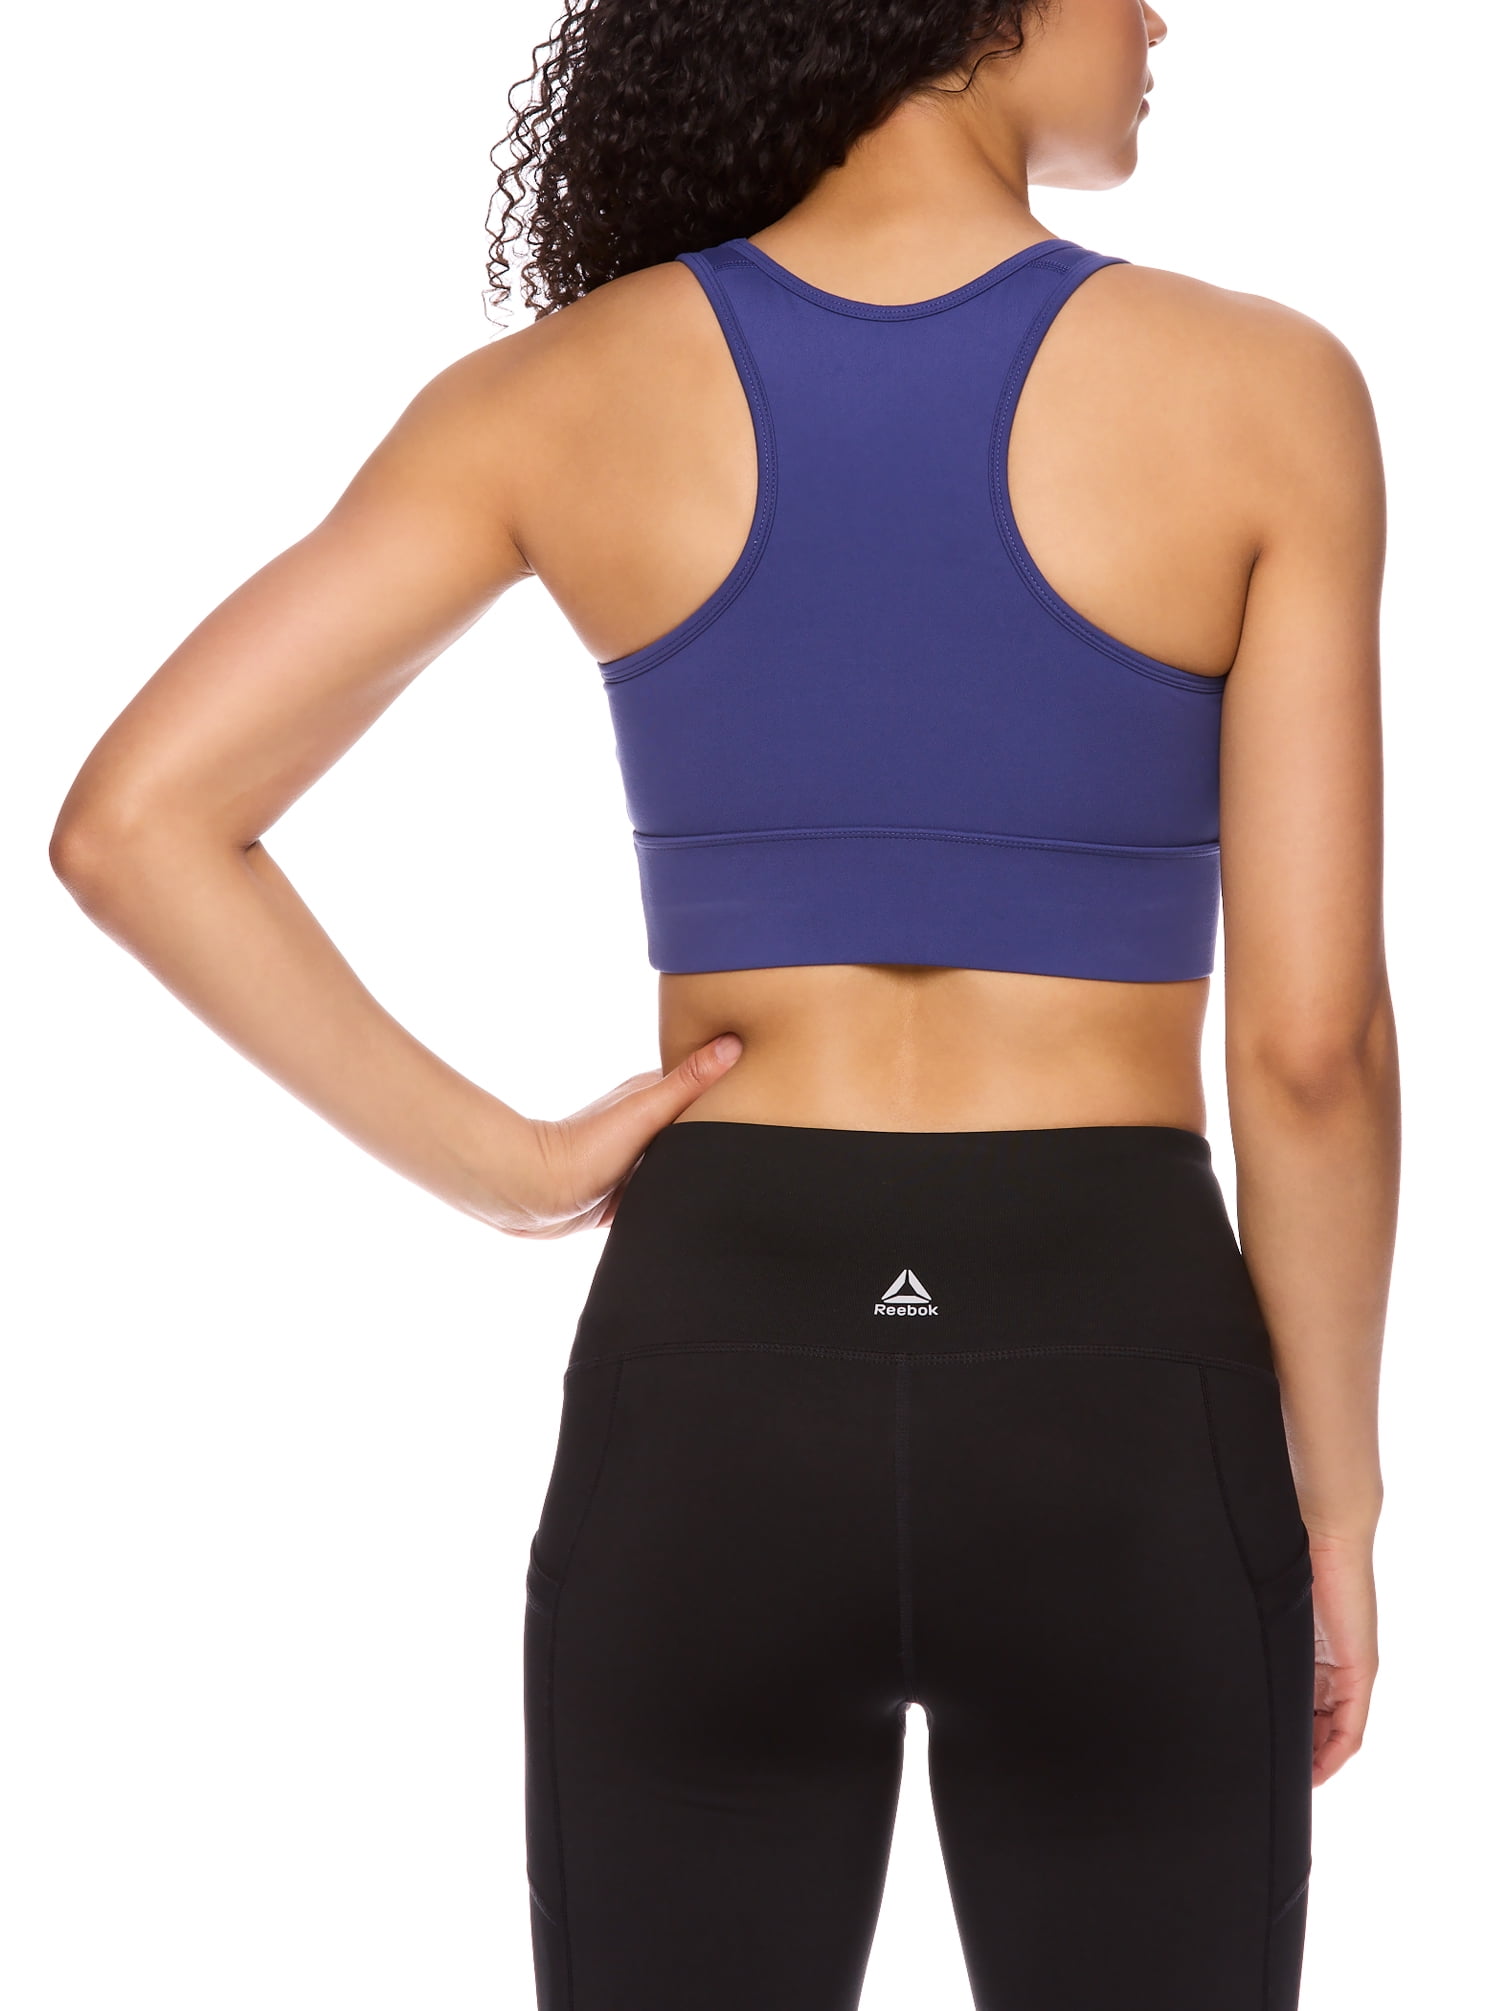 Reebok Women's Renew Longlined Printed Sports Bra with Removable Cups